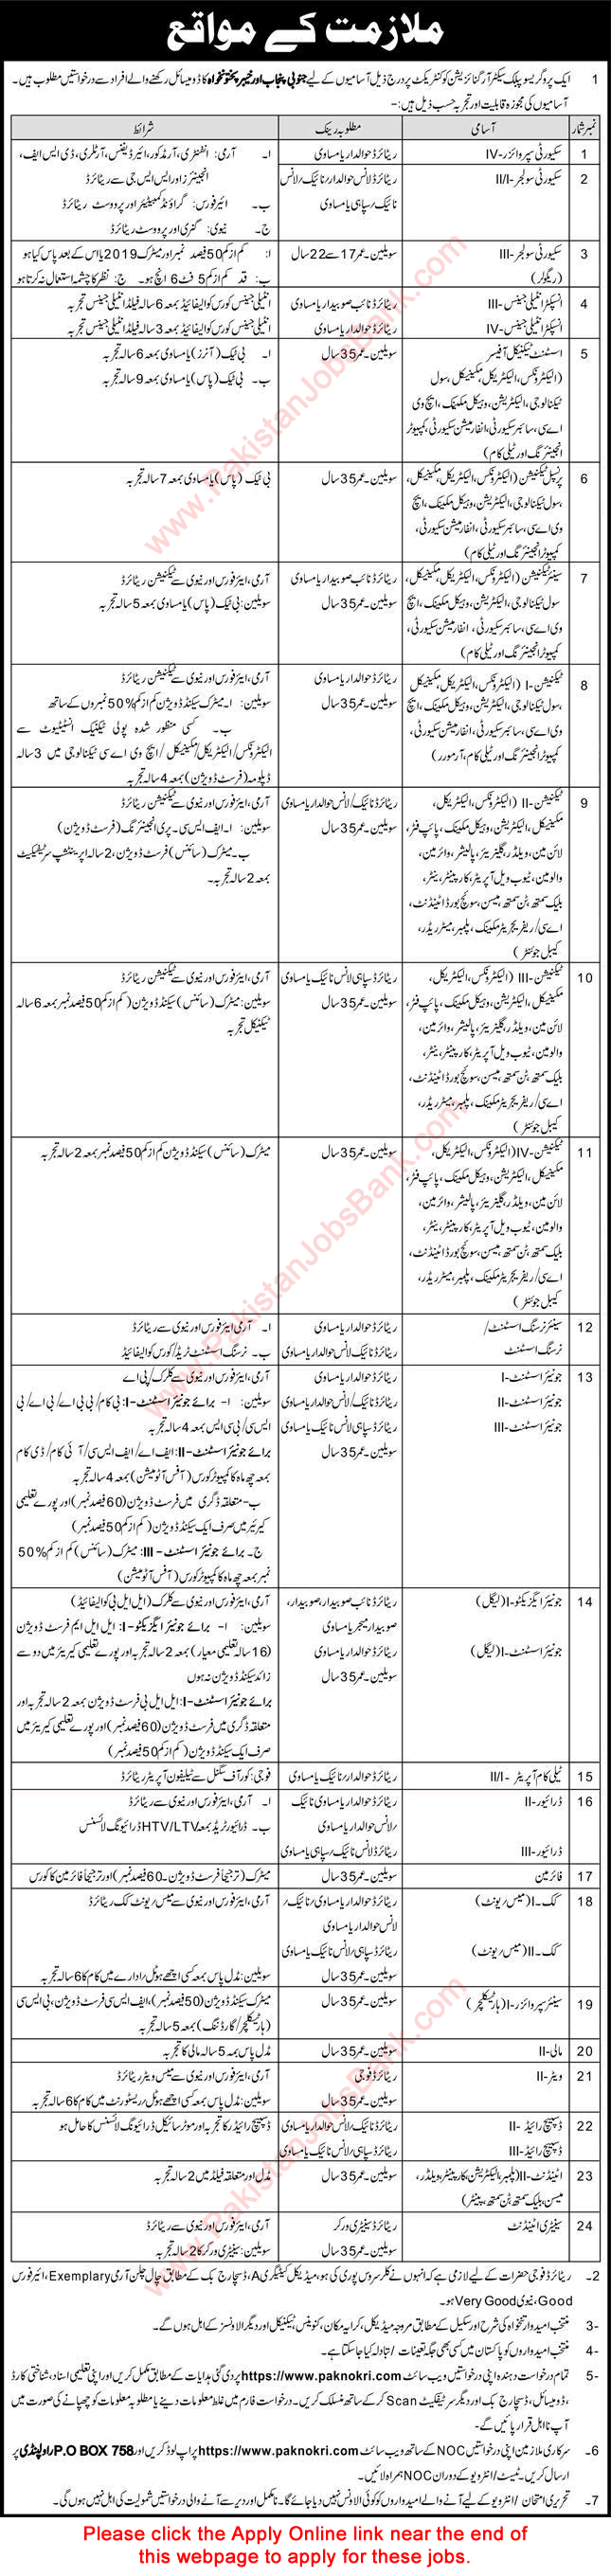 PO Box 758 Rawalpindi Jobs October 2021 Apply Online Technicians, Assistant Technical Officers & Others Latest